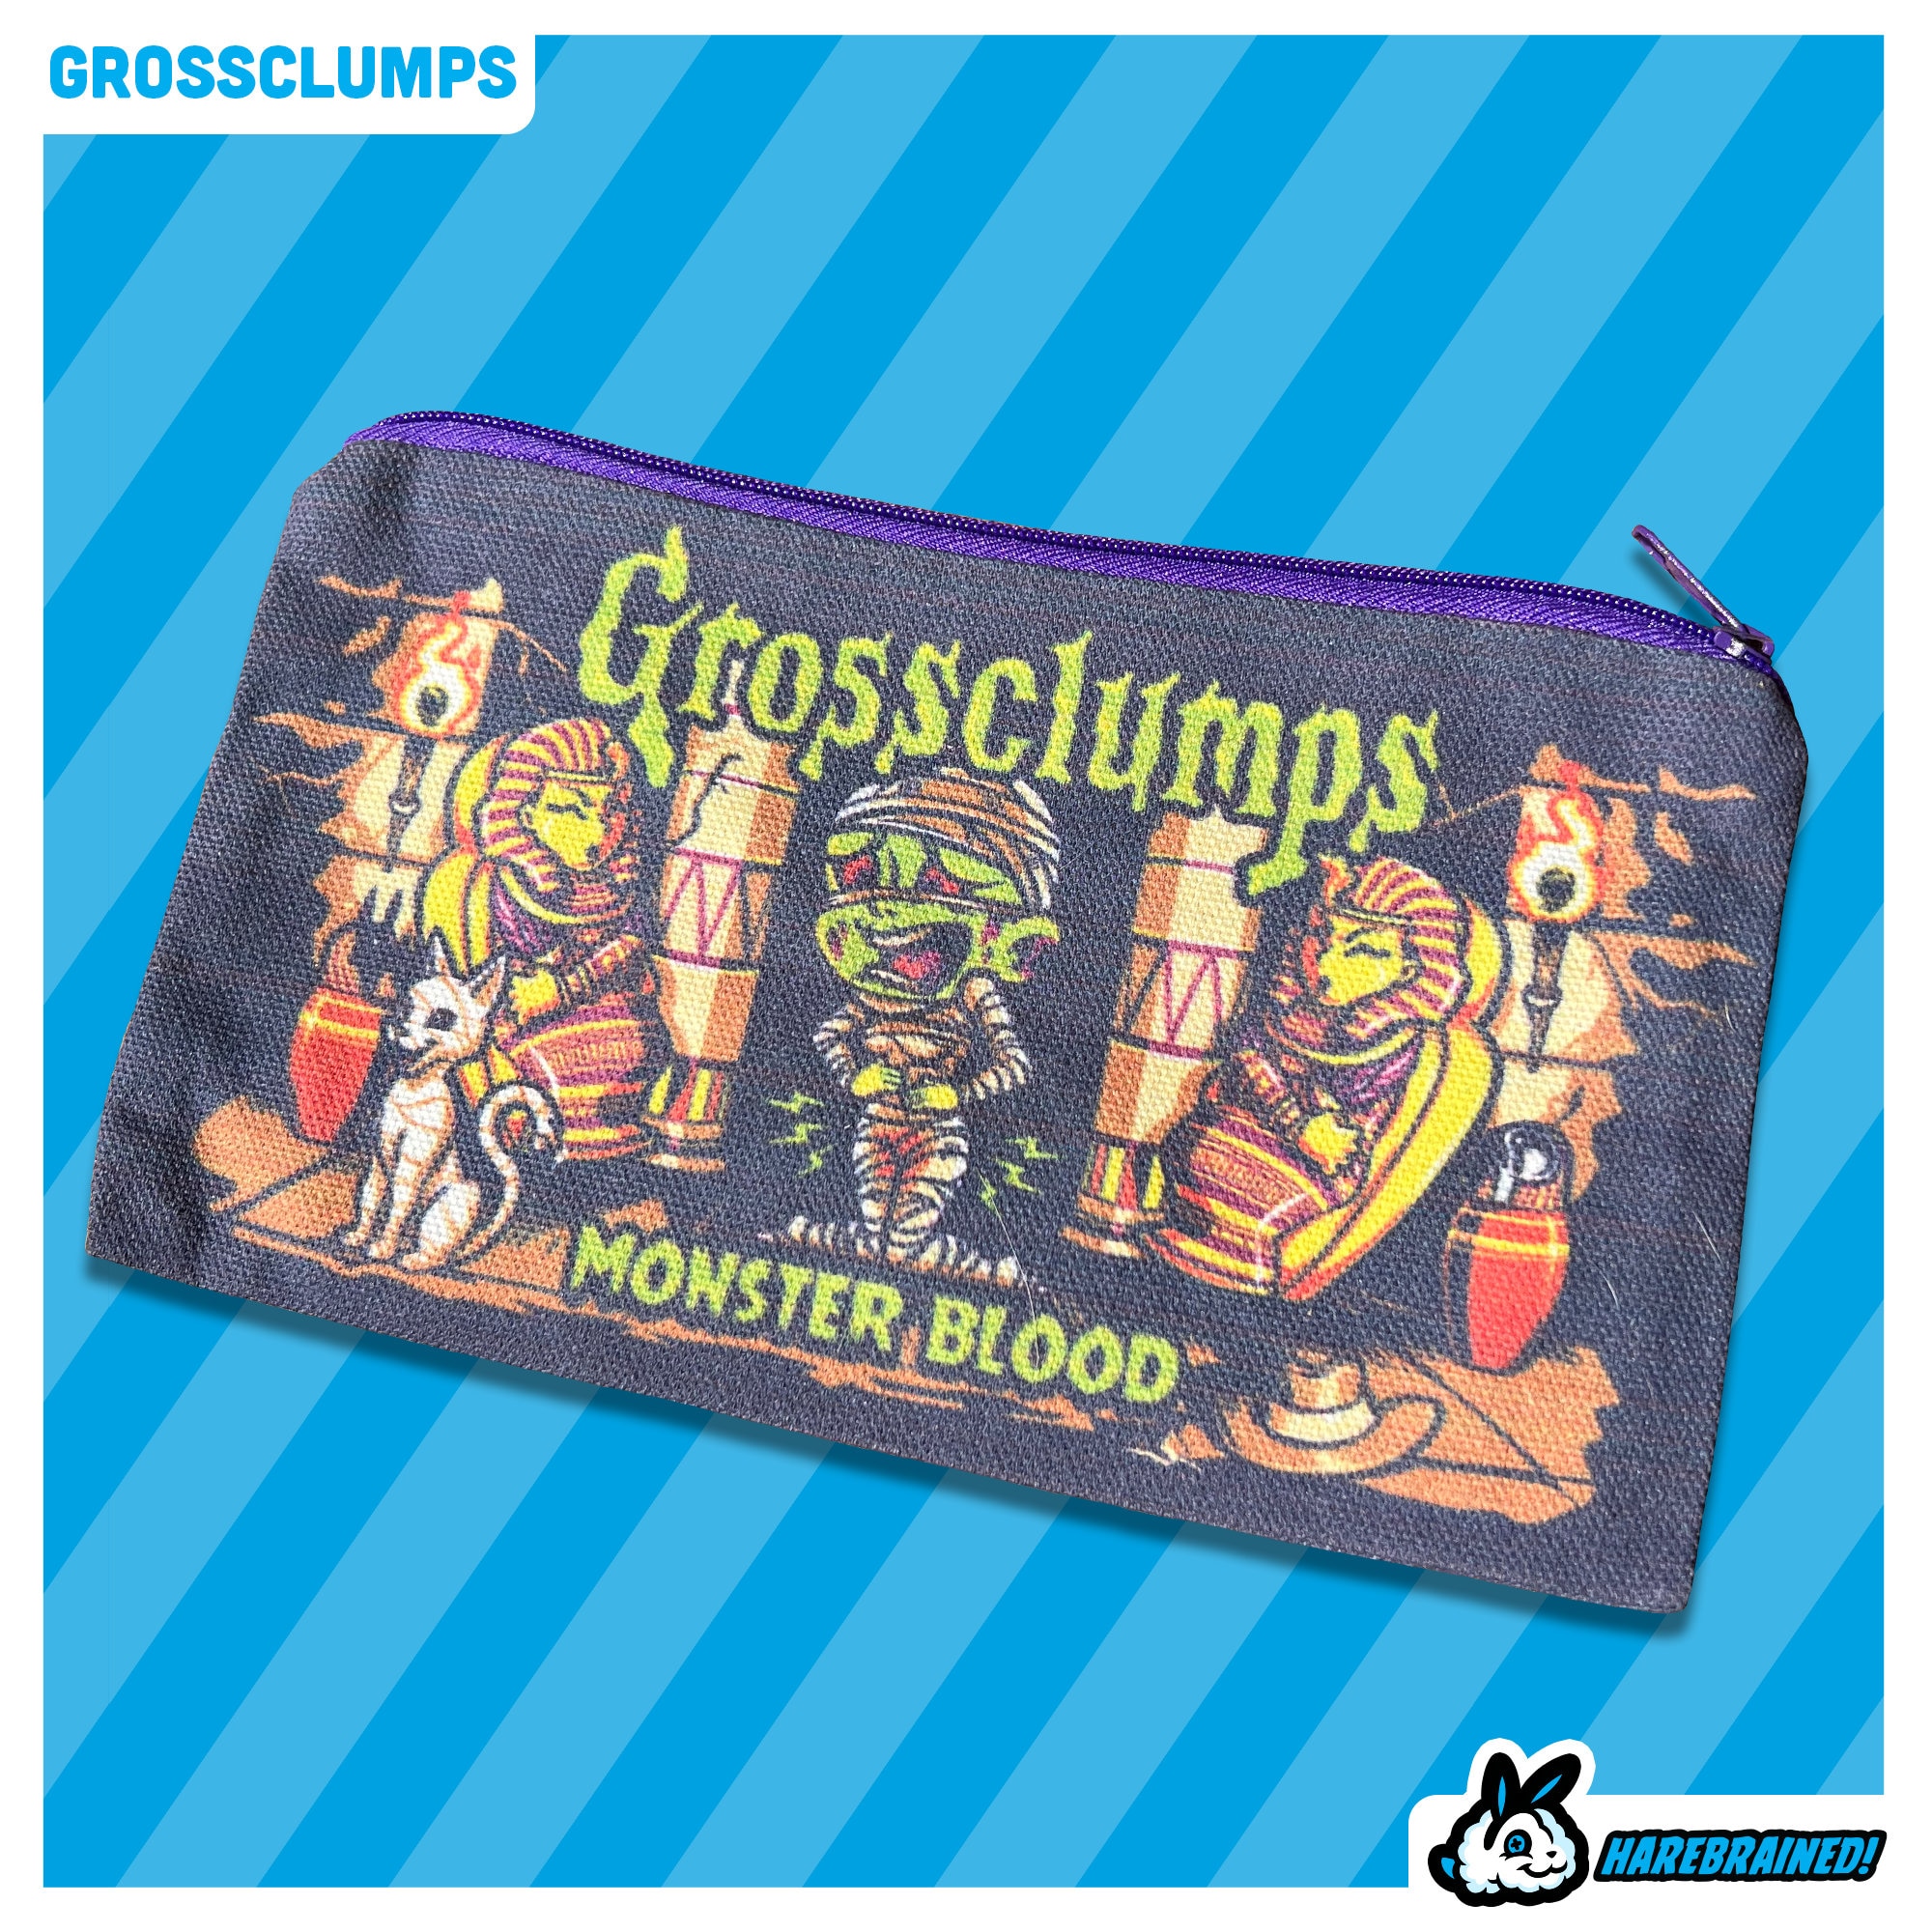 Grossclumps Tampon Case – Harebrained